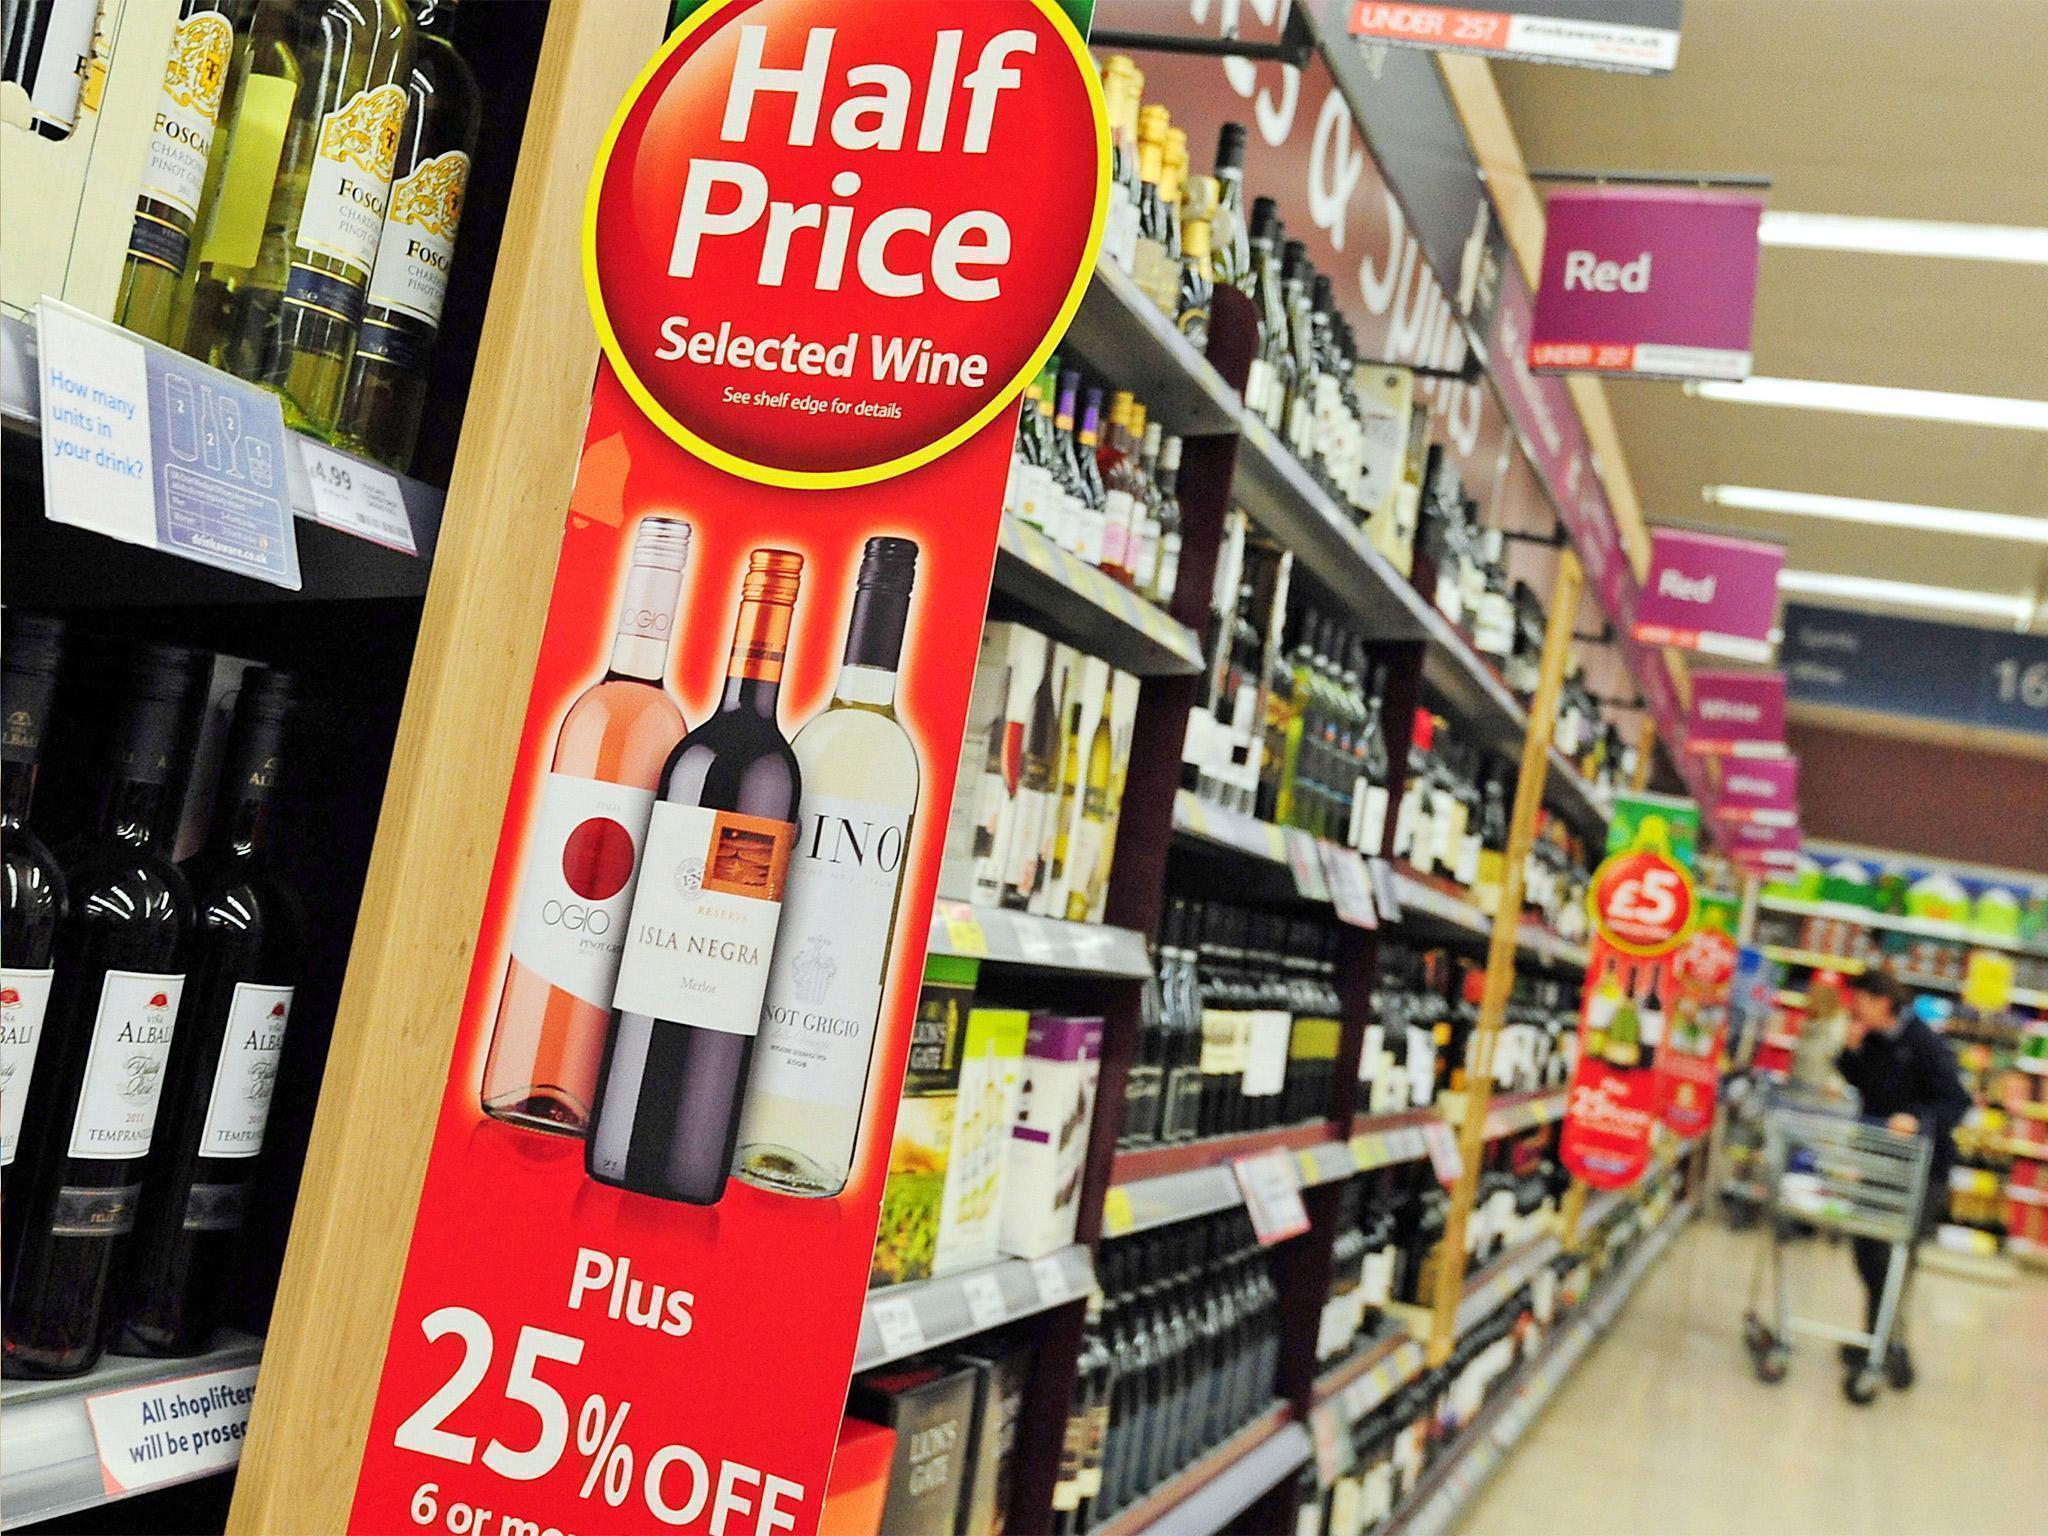 Supermarkets should introduce more offers aimed at the elderly, researchers say